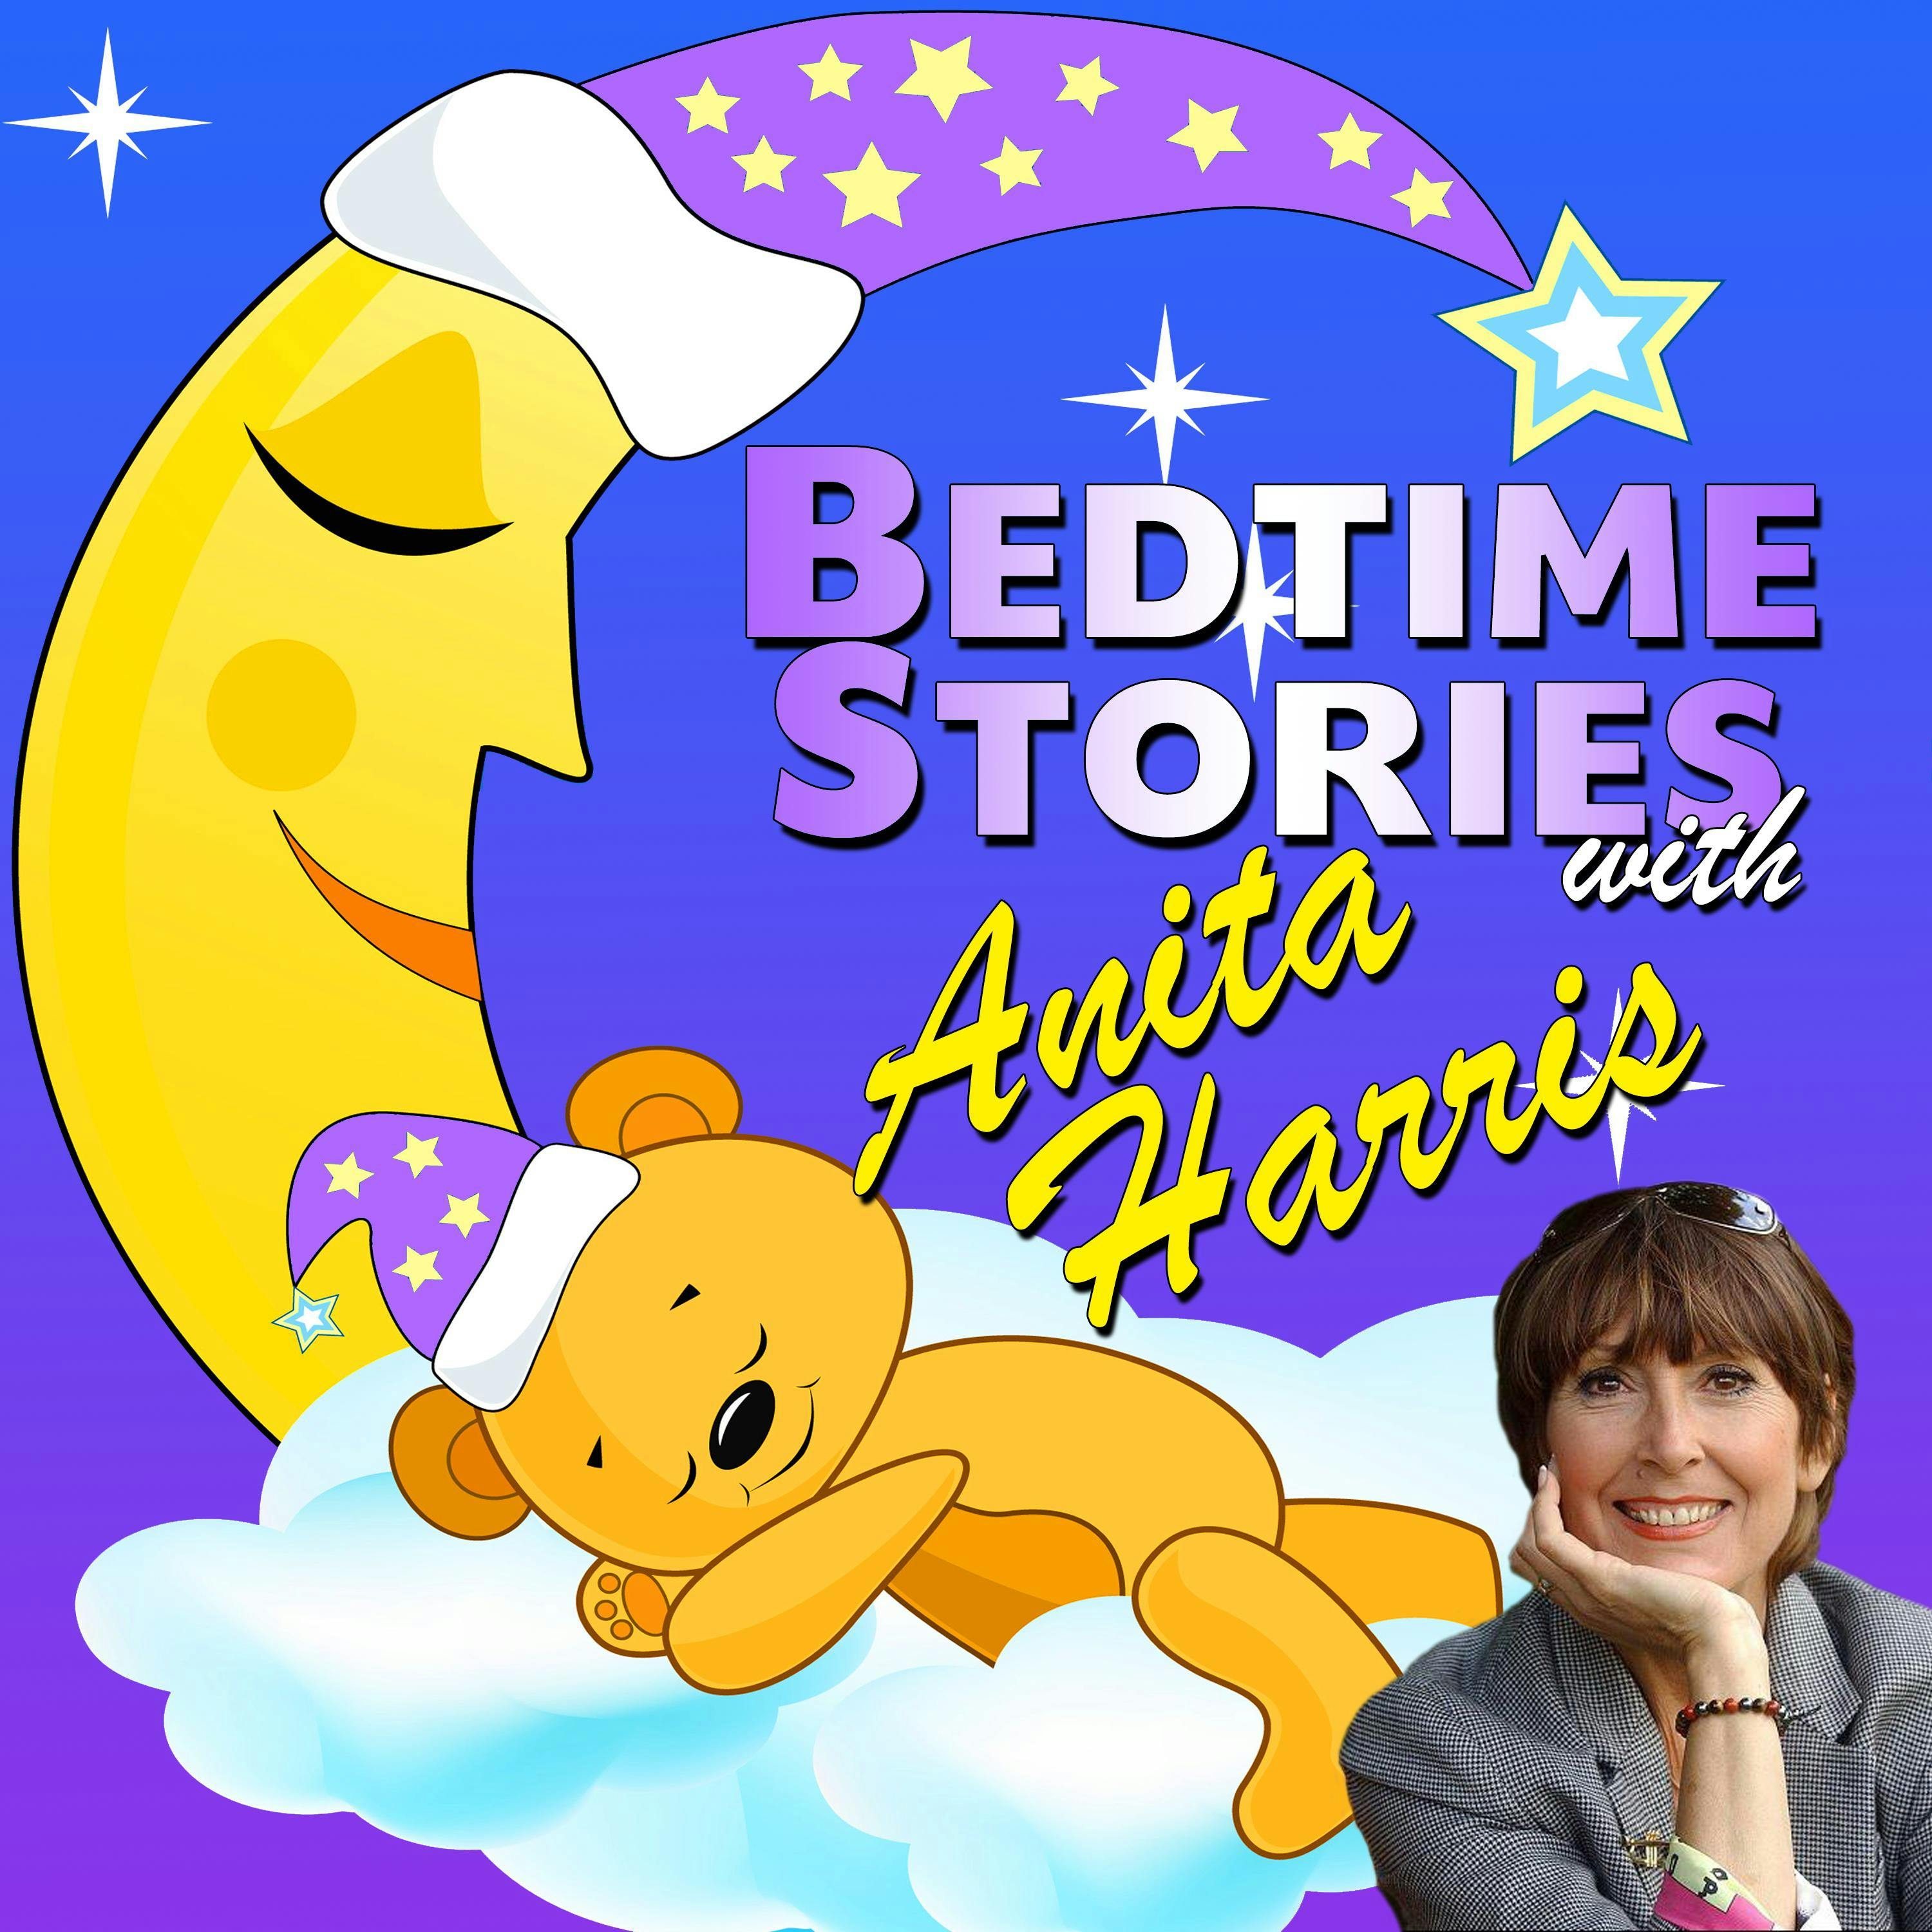 Bedtime Stories with Anita Harris - undefined